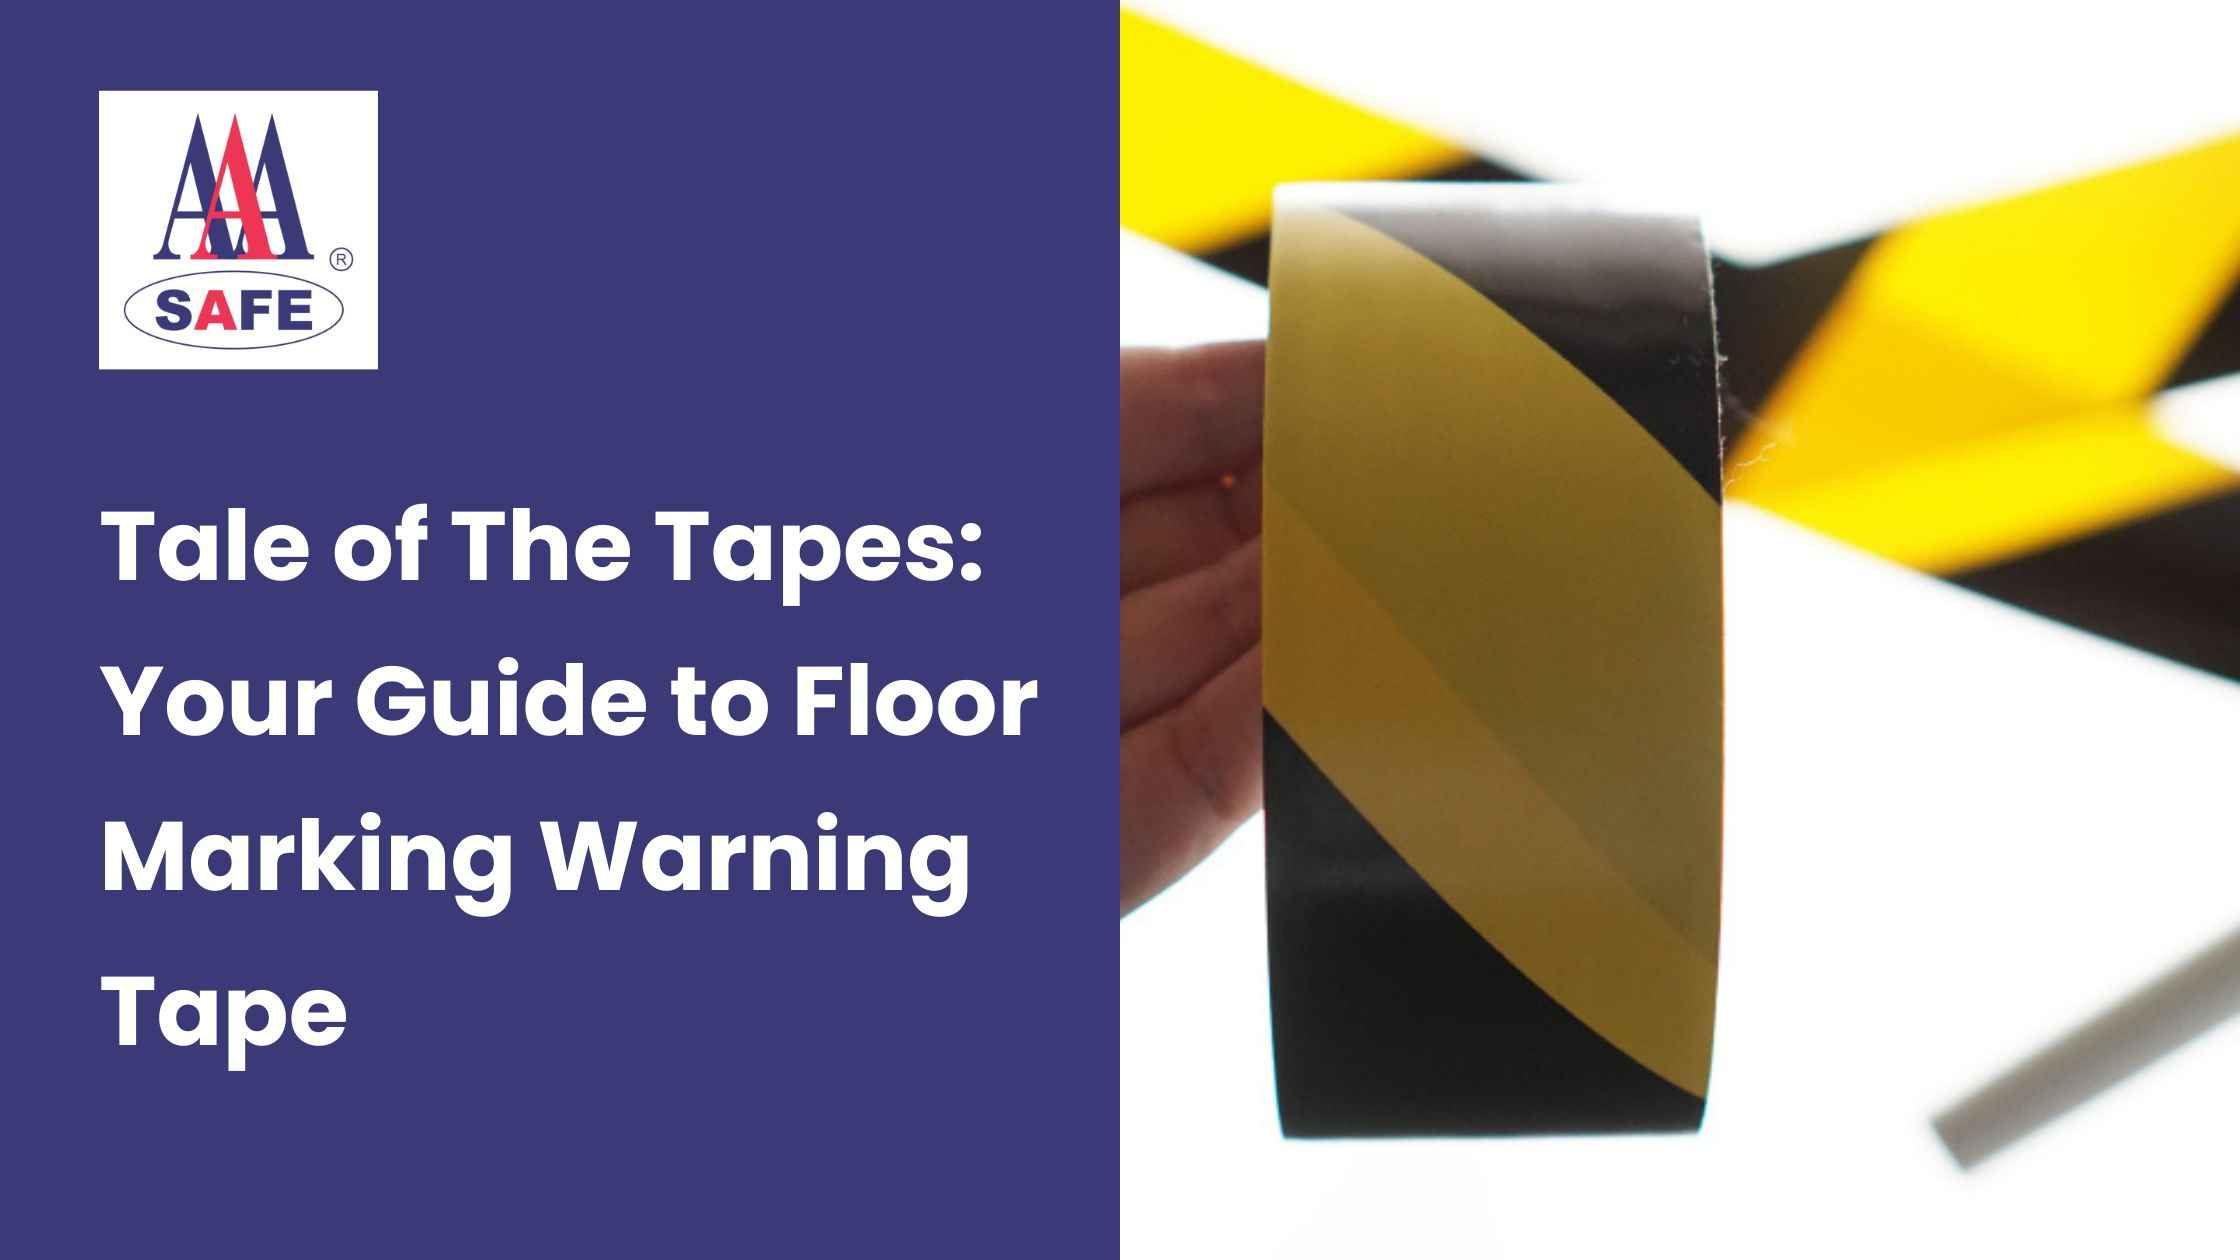 Tale of The Tapes: Your Guide to Floor Marking Warning Tape